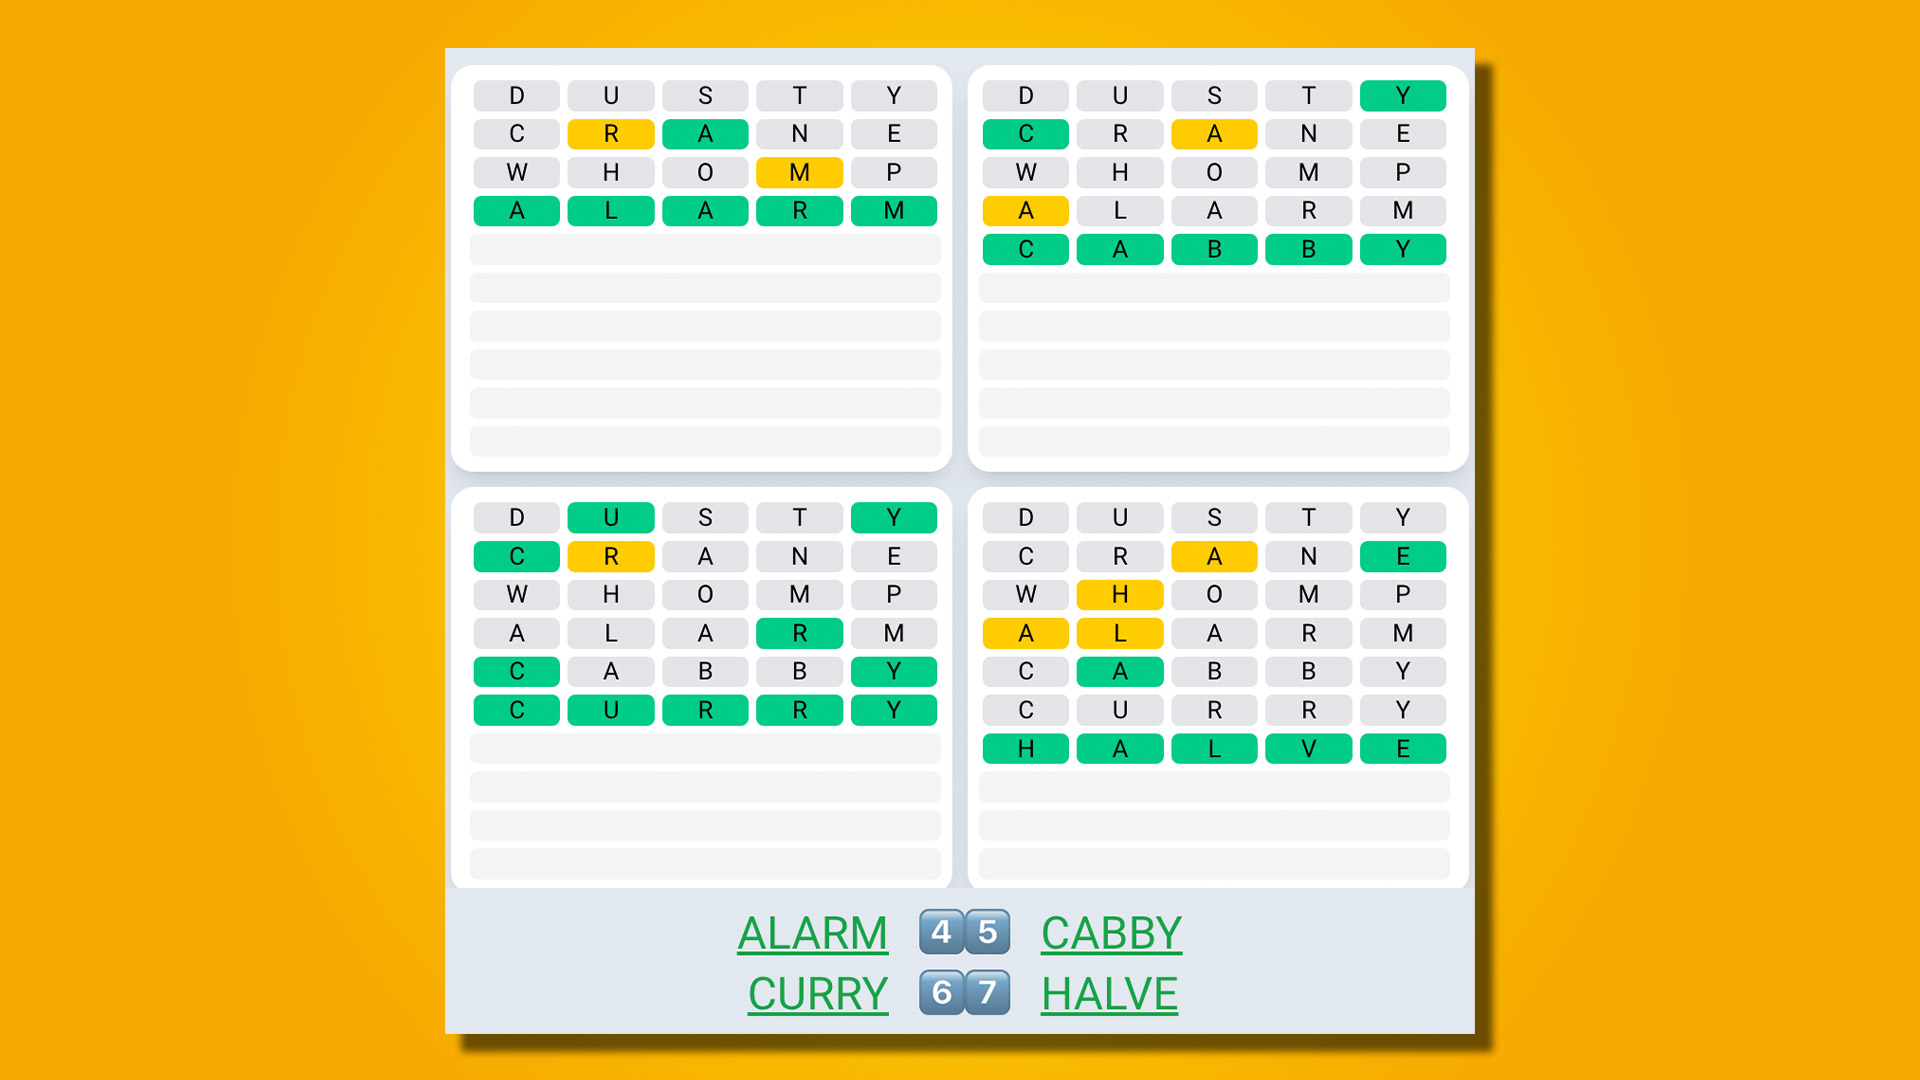 Quordle Daily Sequence answers for game 533 on a yellow background